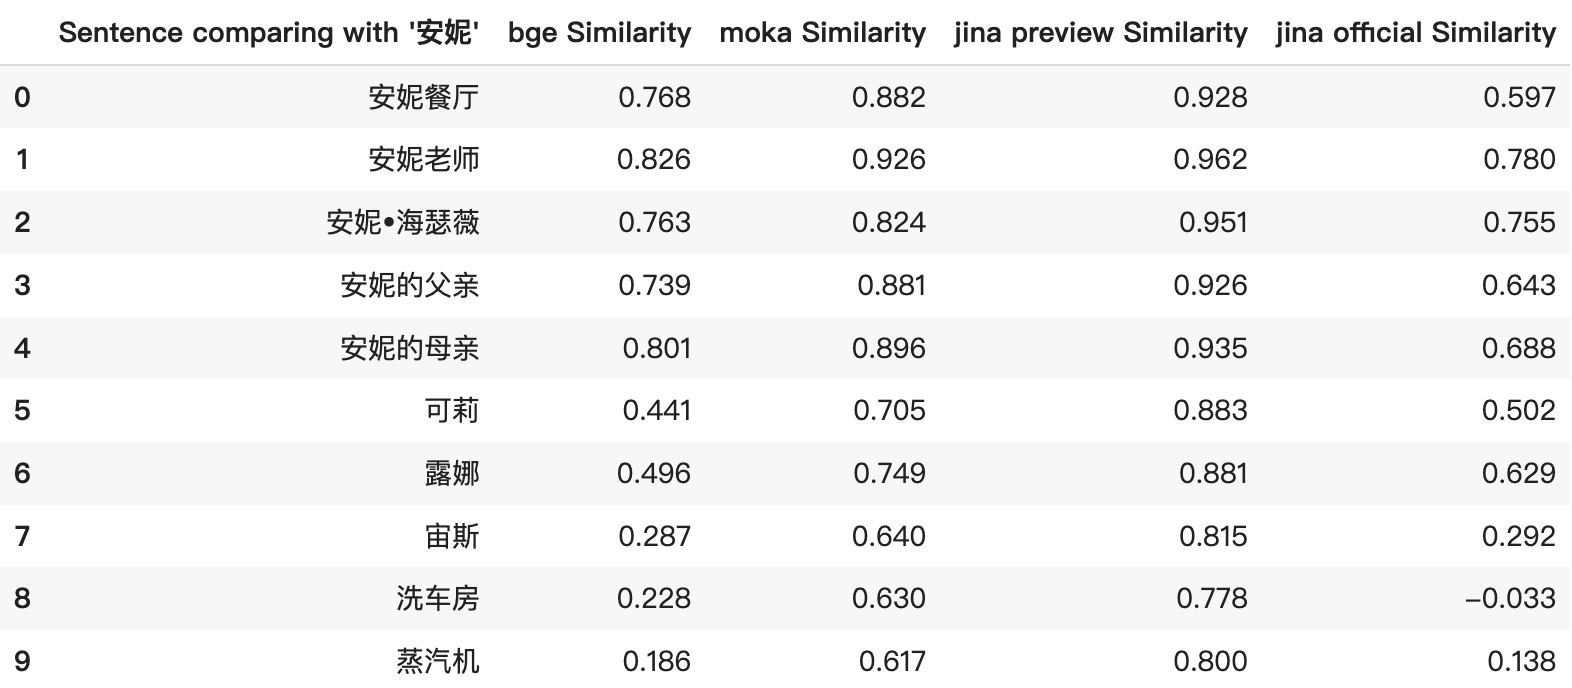 Detailed table with sentence similarity scores for Chinese entities, showcasing precision and recall values ranging from 0 to 1